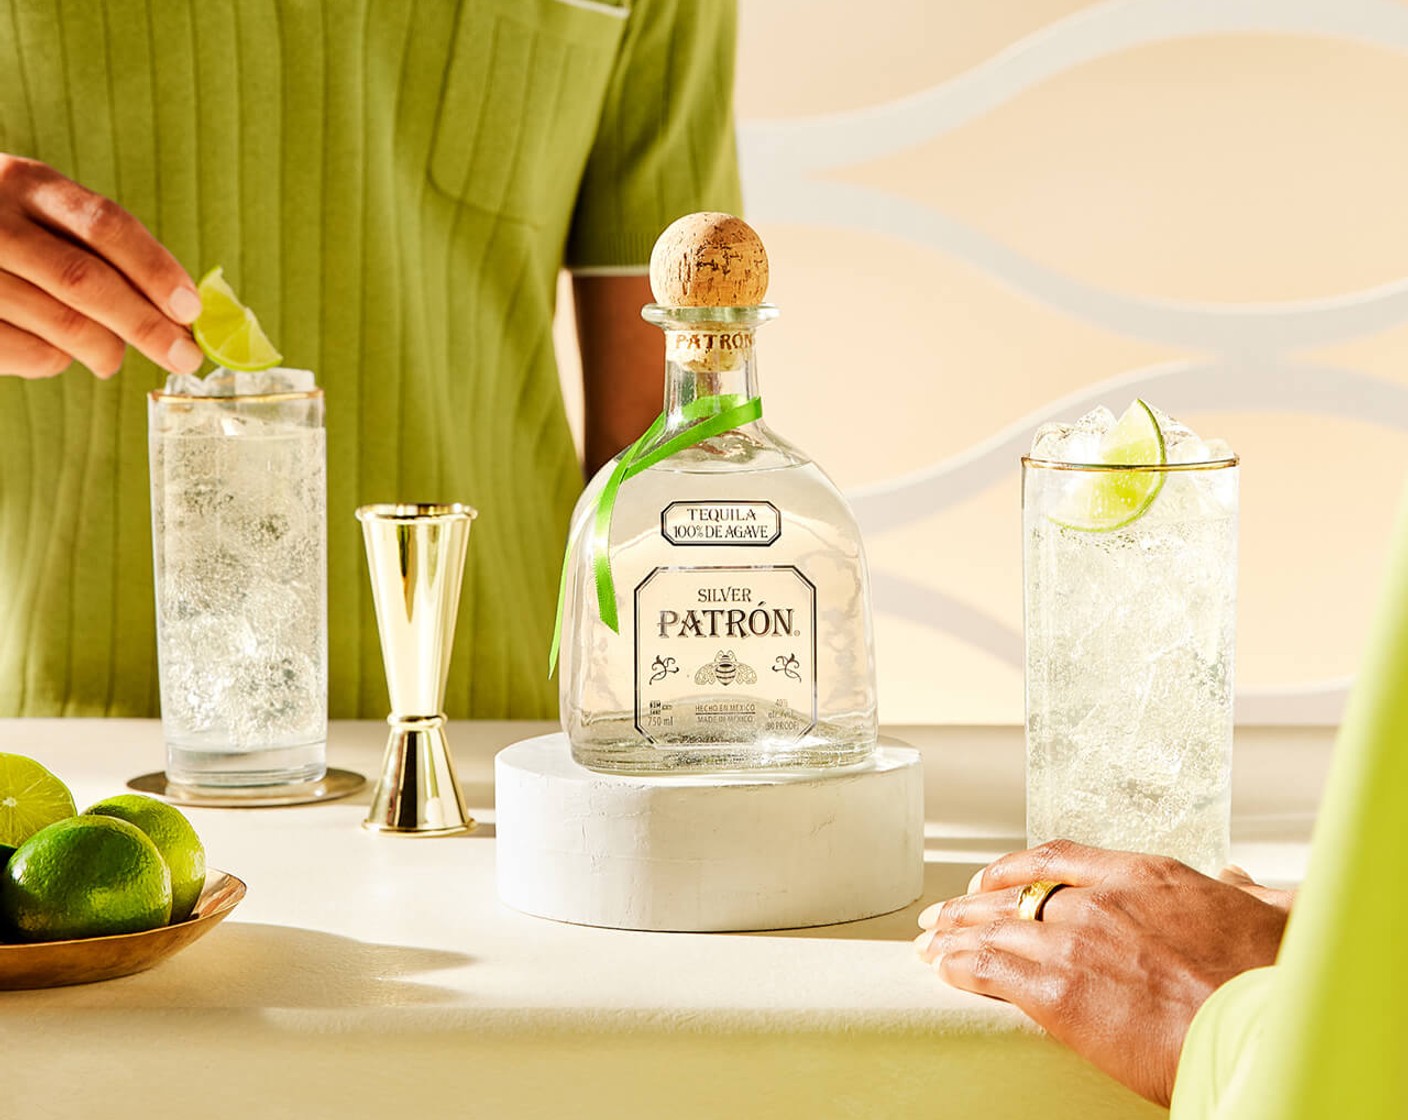 step 2 Top with your preferred Sparkling Water (12 fl oz) and stir gently to combine.